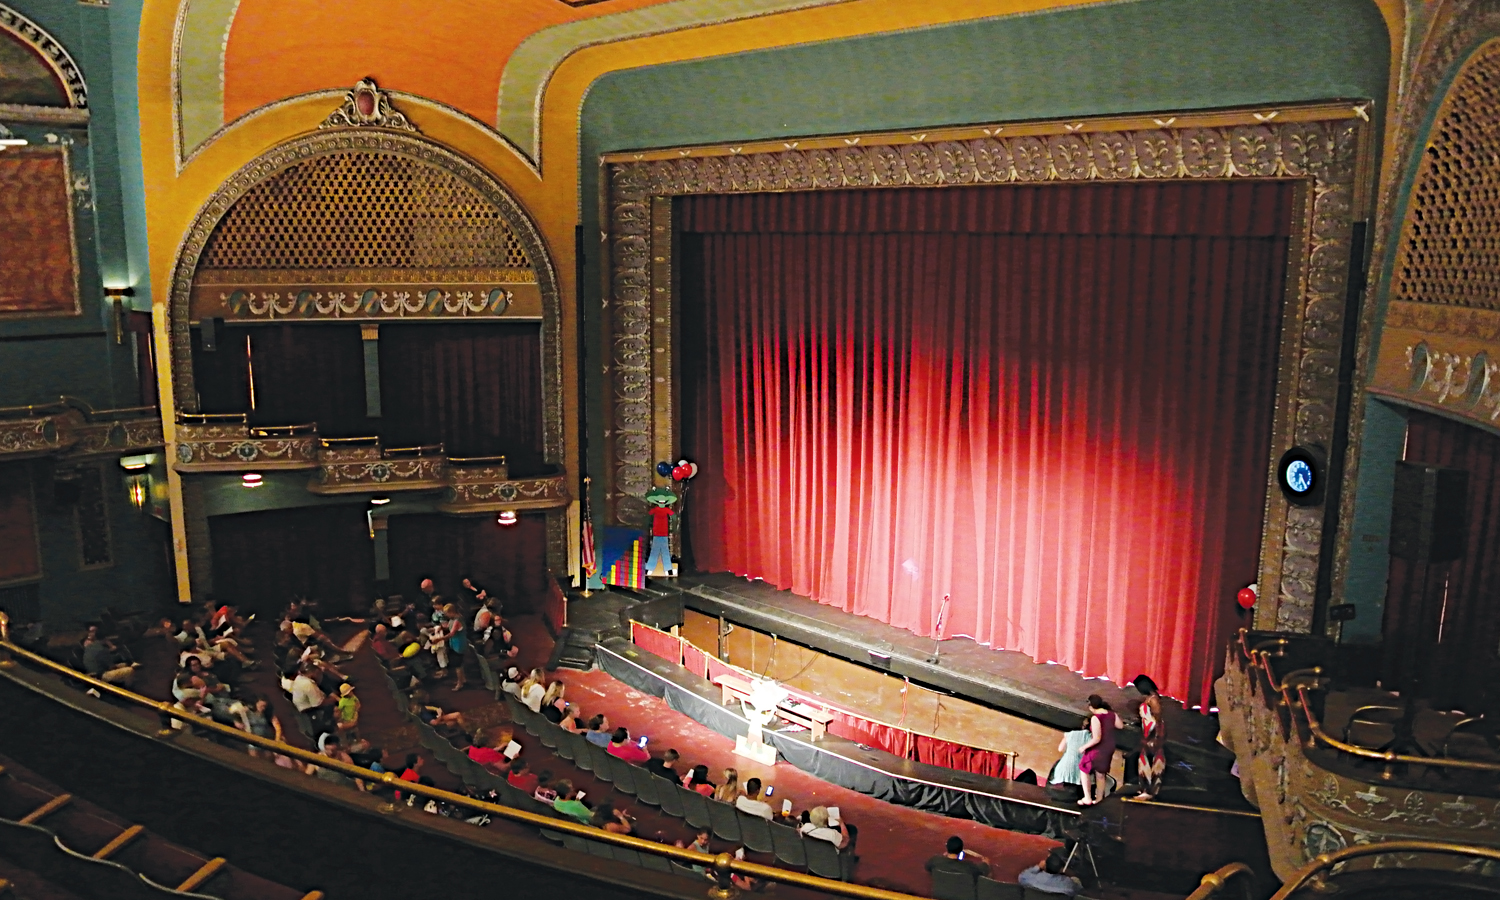 Historic Palace Theatre | Located in the Heart of Lockport, NY